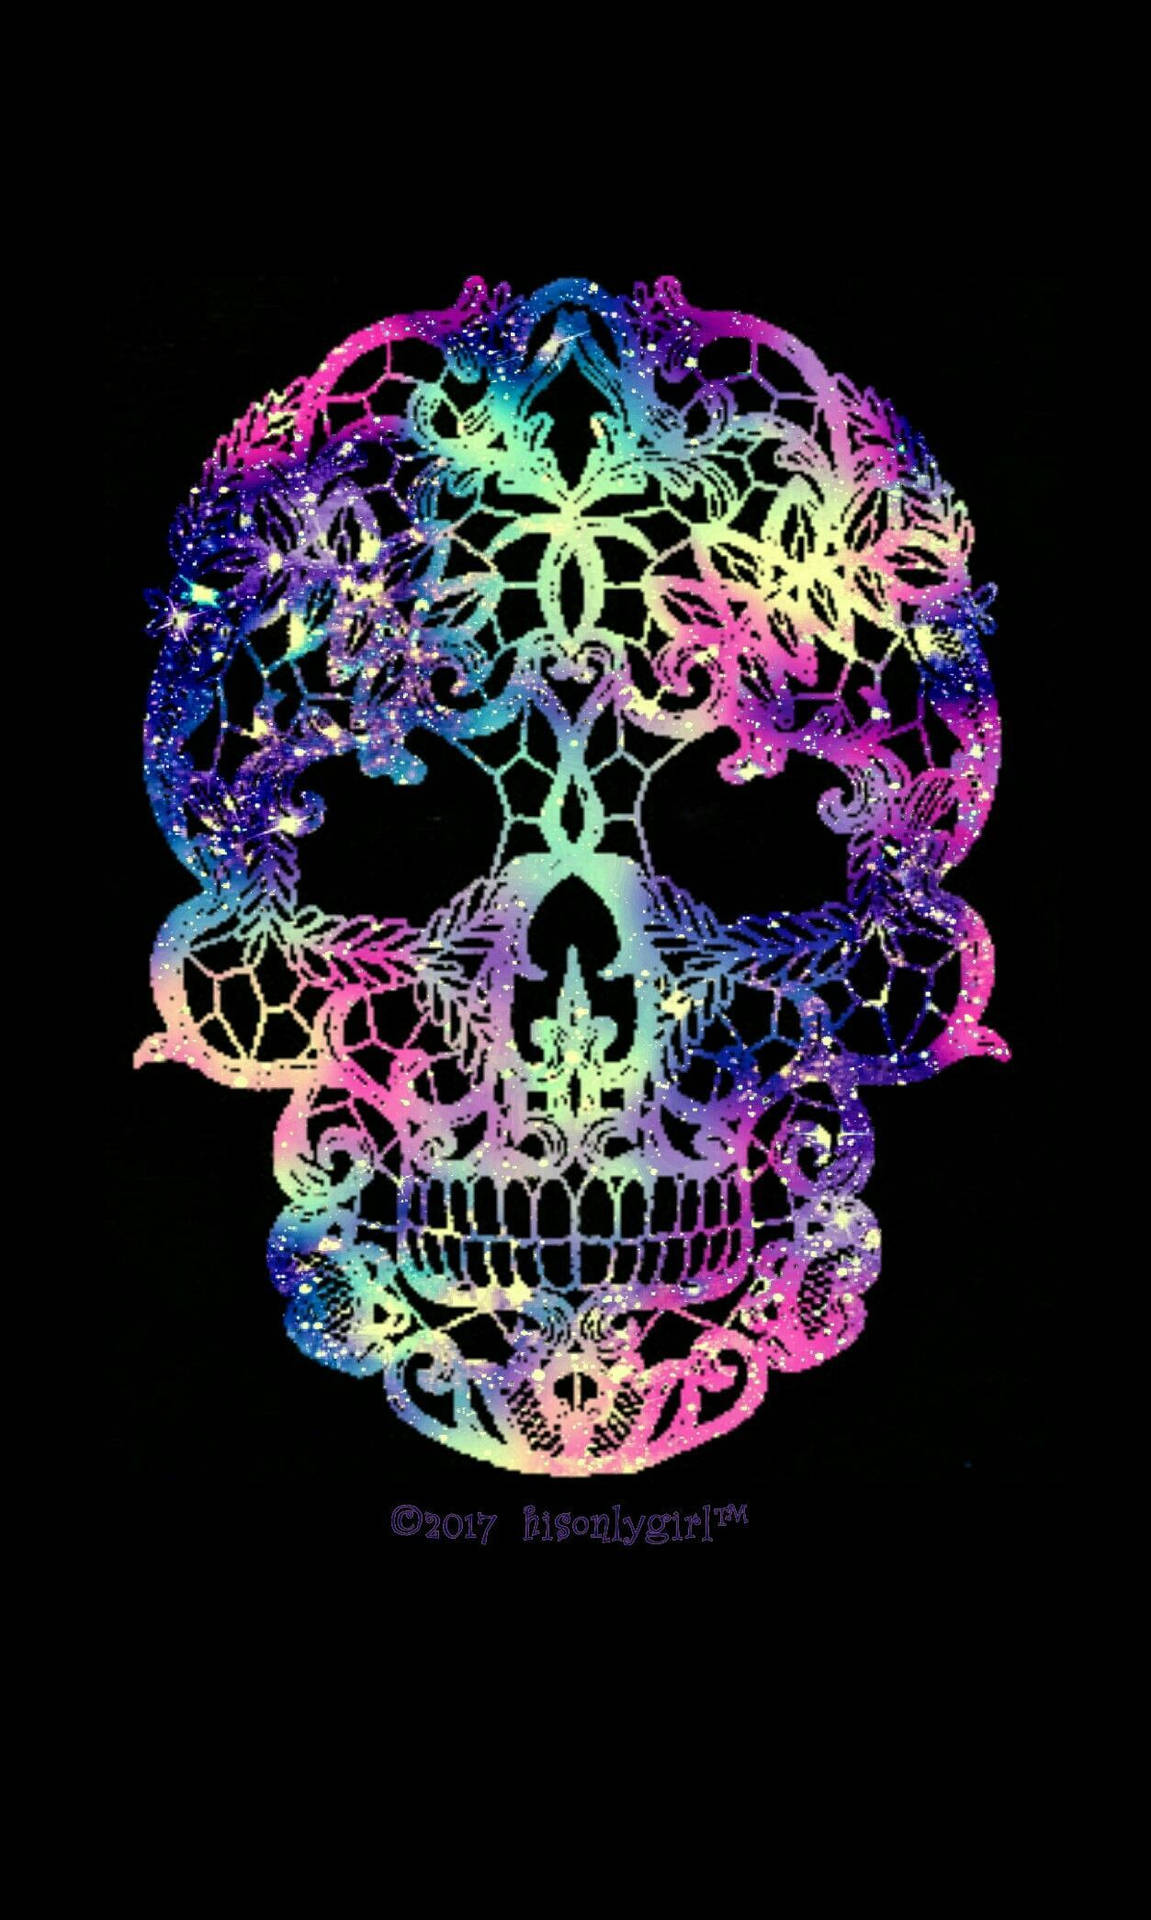 A Colorful Skull For an Unforgettable Look Wallpaper